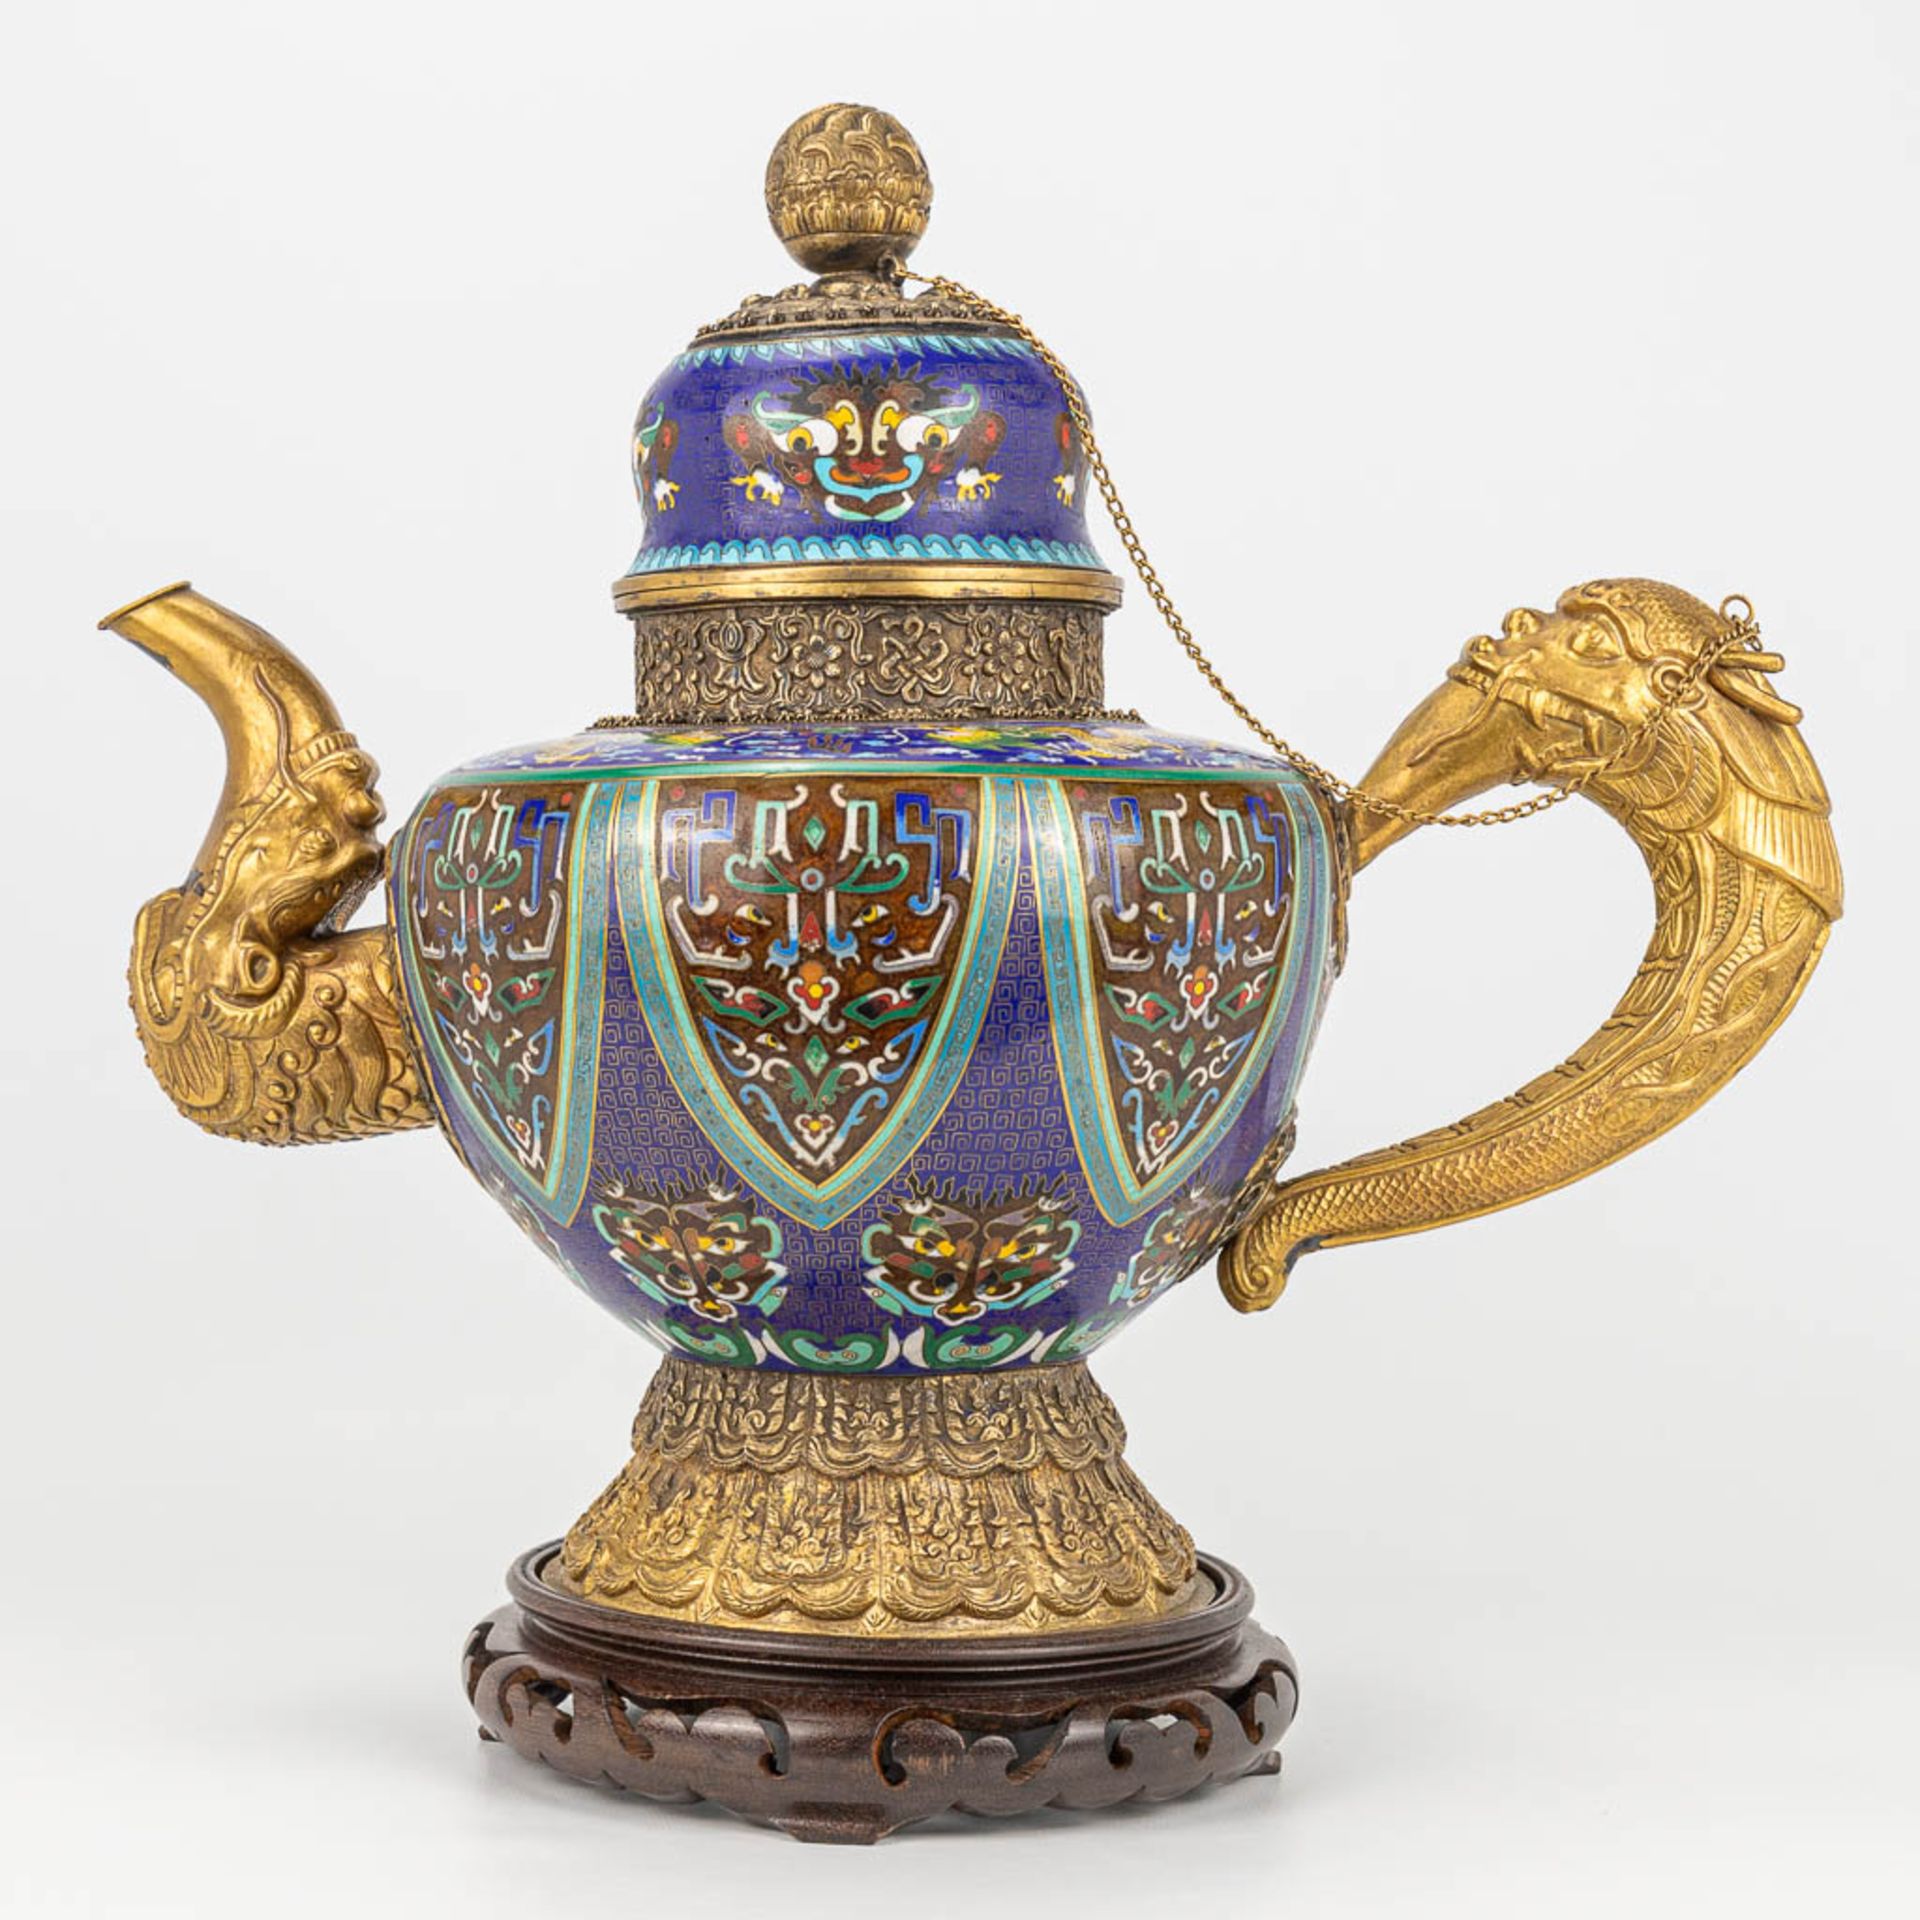 A Tibetan ceremonial ewer made of gilt bronze and finished with cloisonnŽ bronze. - Image 12 of 18